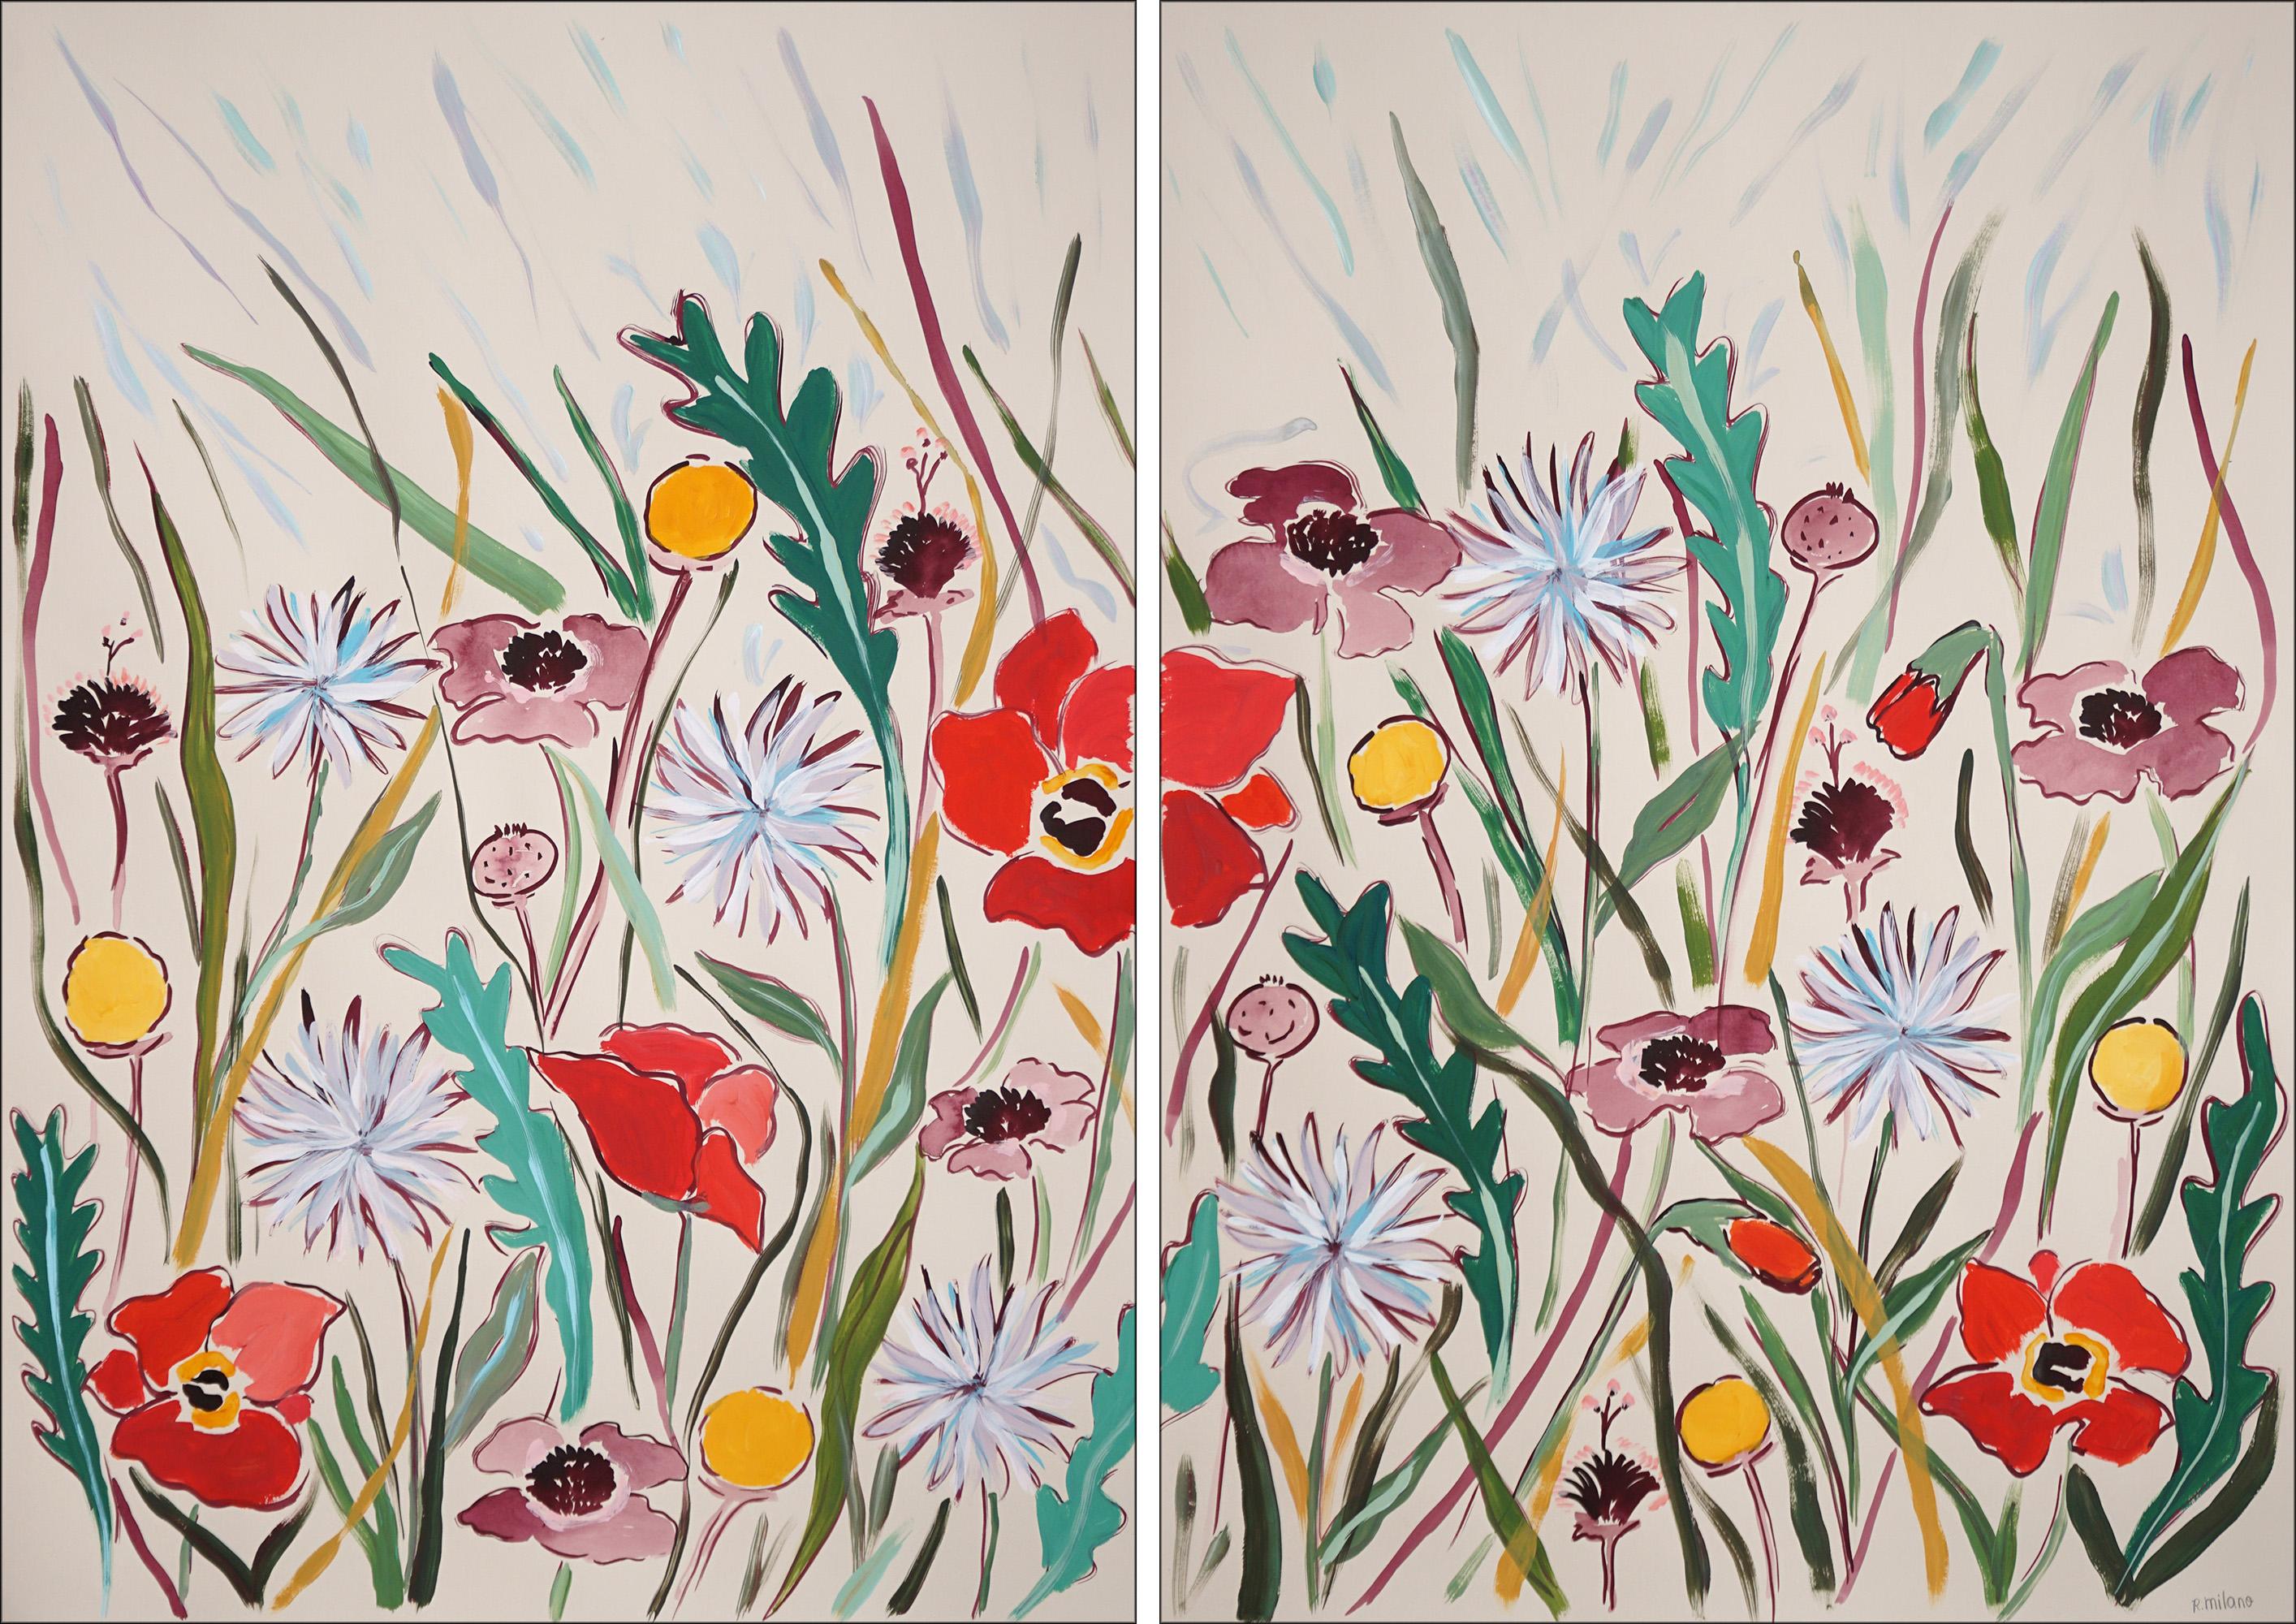 Romina Milano Landscape Painting - Pastel Wildflowers II, Illustration Style Diptych, Red Poppies and Dandelions 